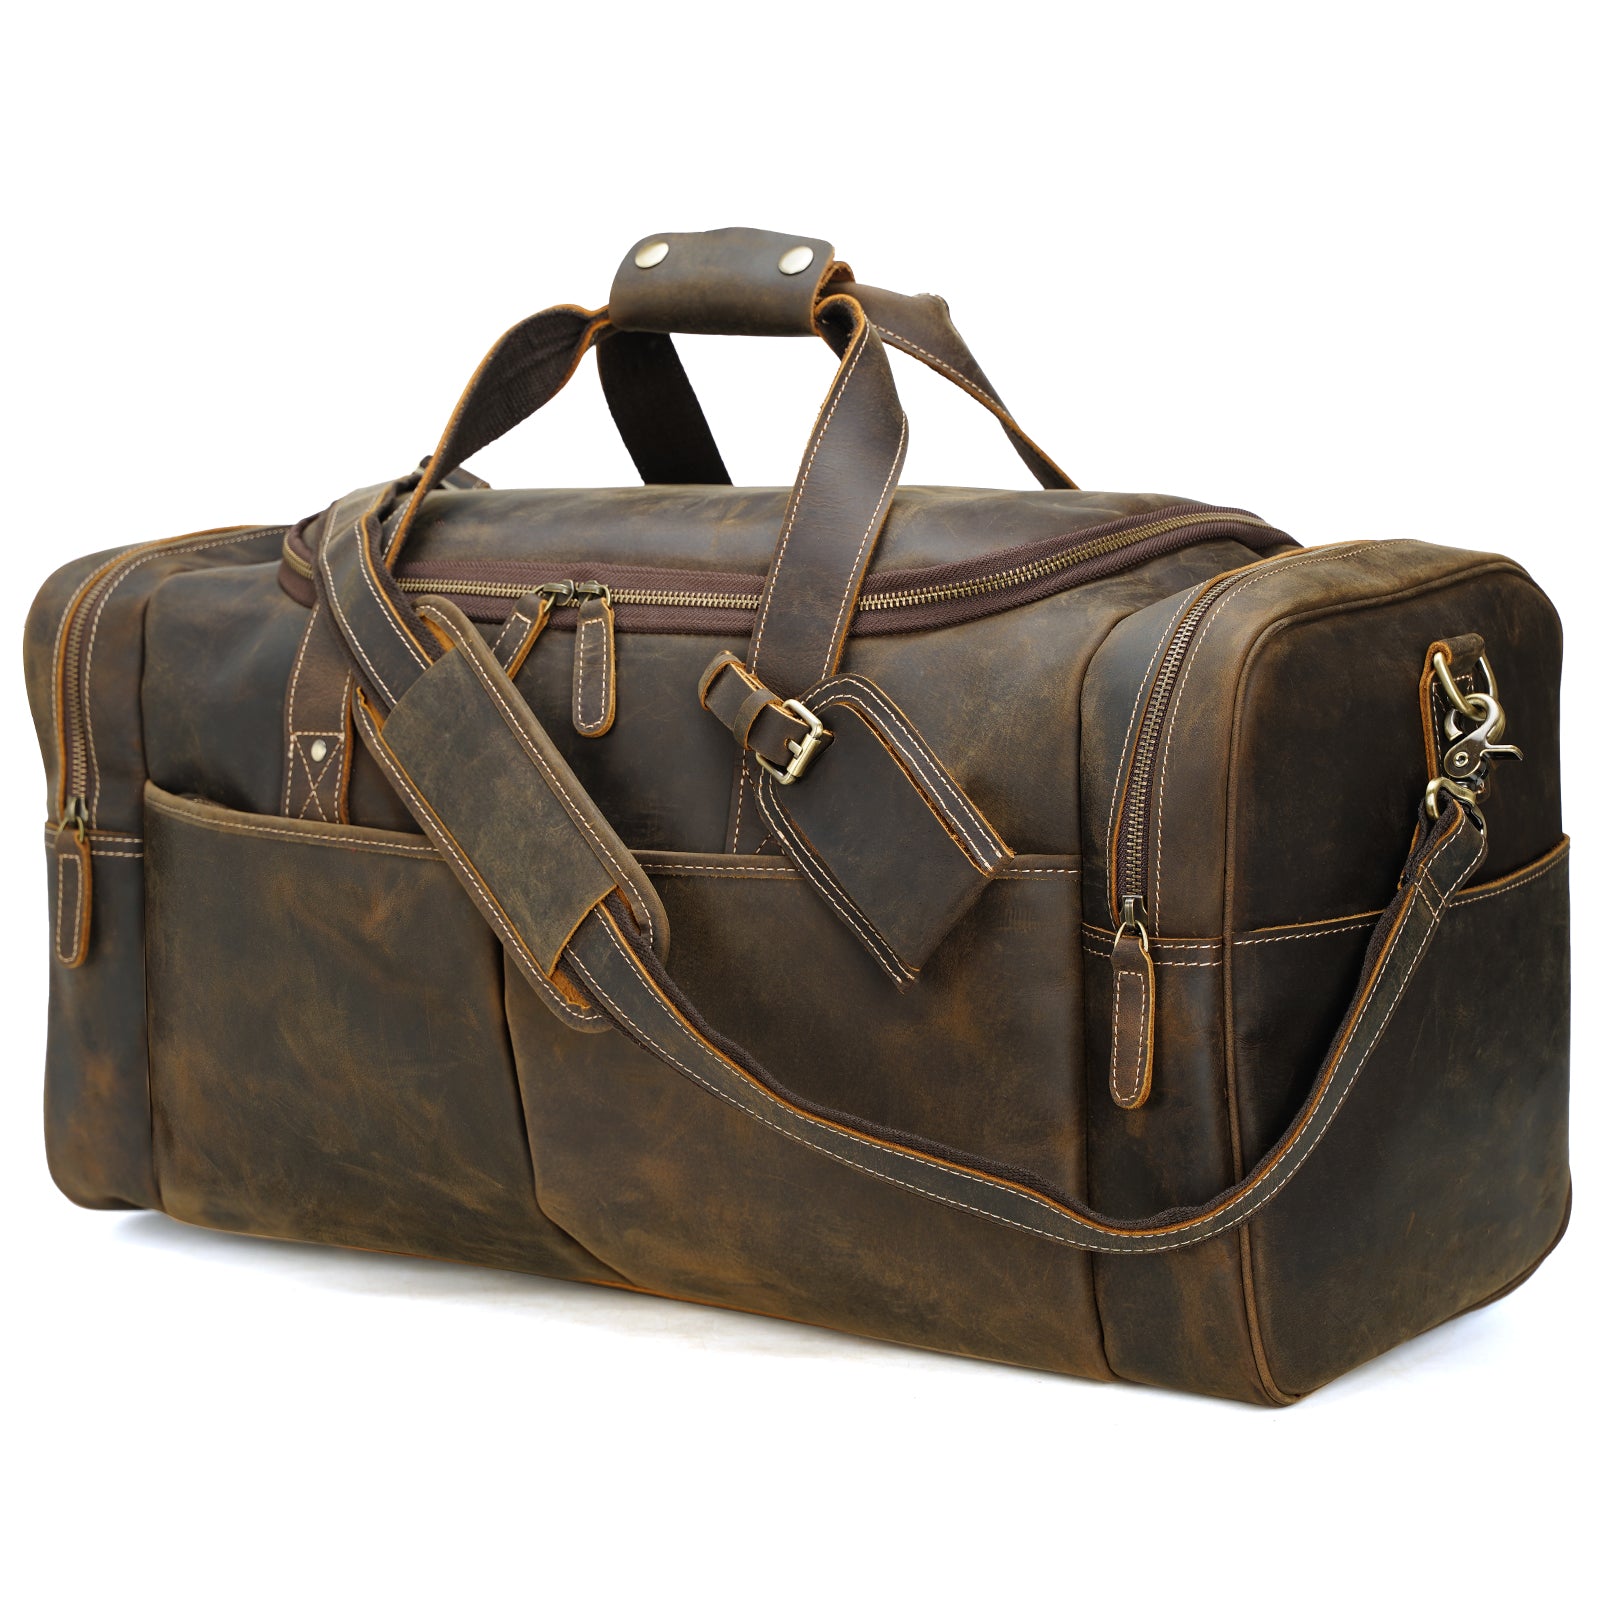 Where to Buy the Best Leather Duffel Bags for Men and Women? – VacationGrabs